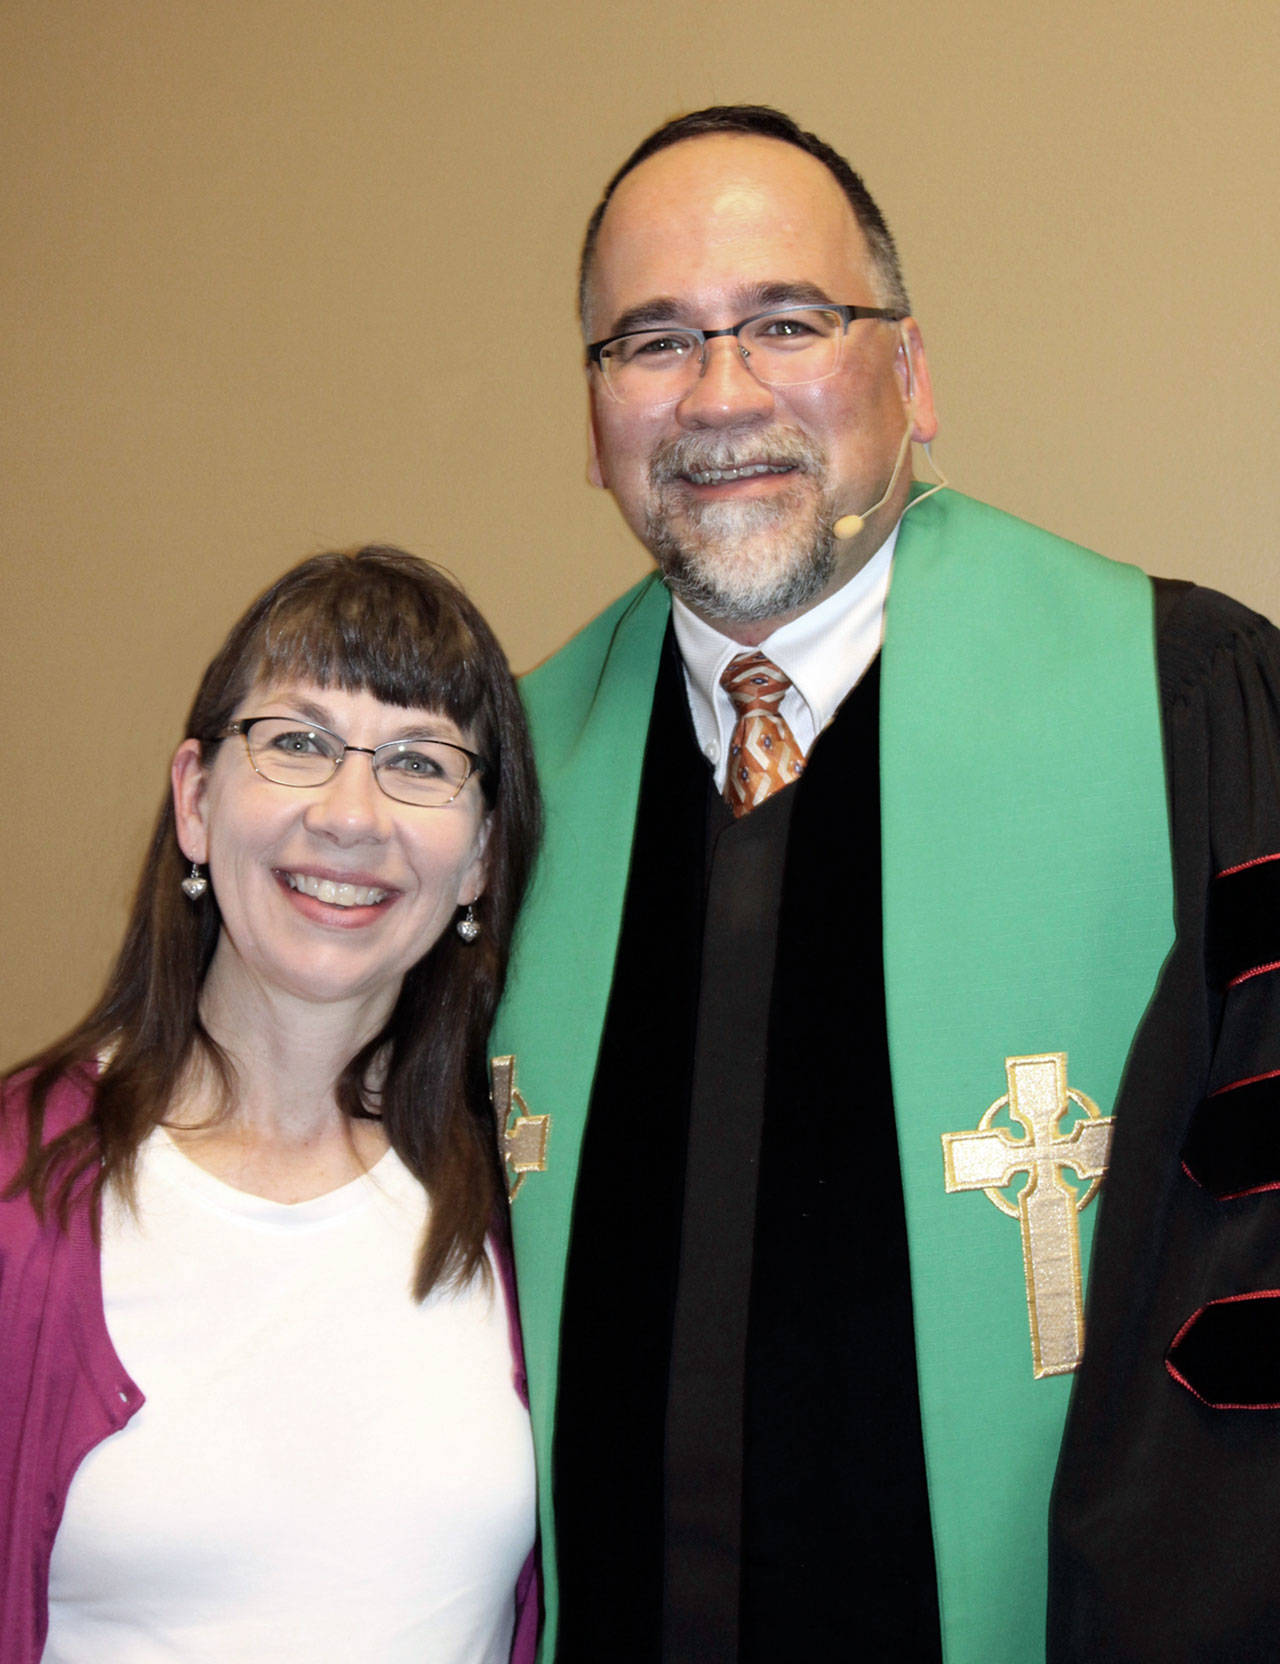 The Rev. Dr. Matt Paul and his wife, Becca, have joined the congregation at the First Presbyterian Church of Port Angeles. (Dave Logan/for Peninsula Daily News)